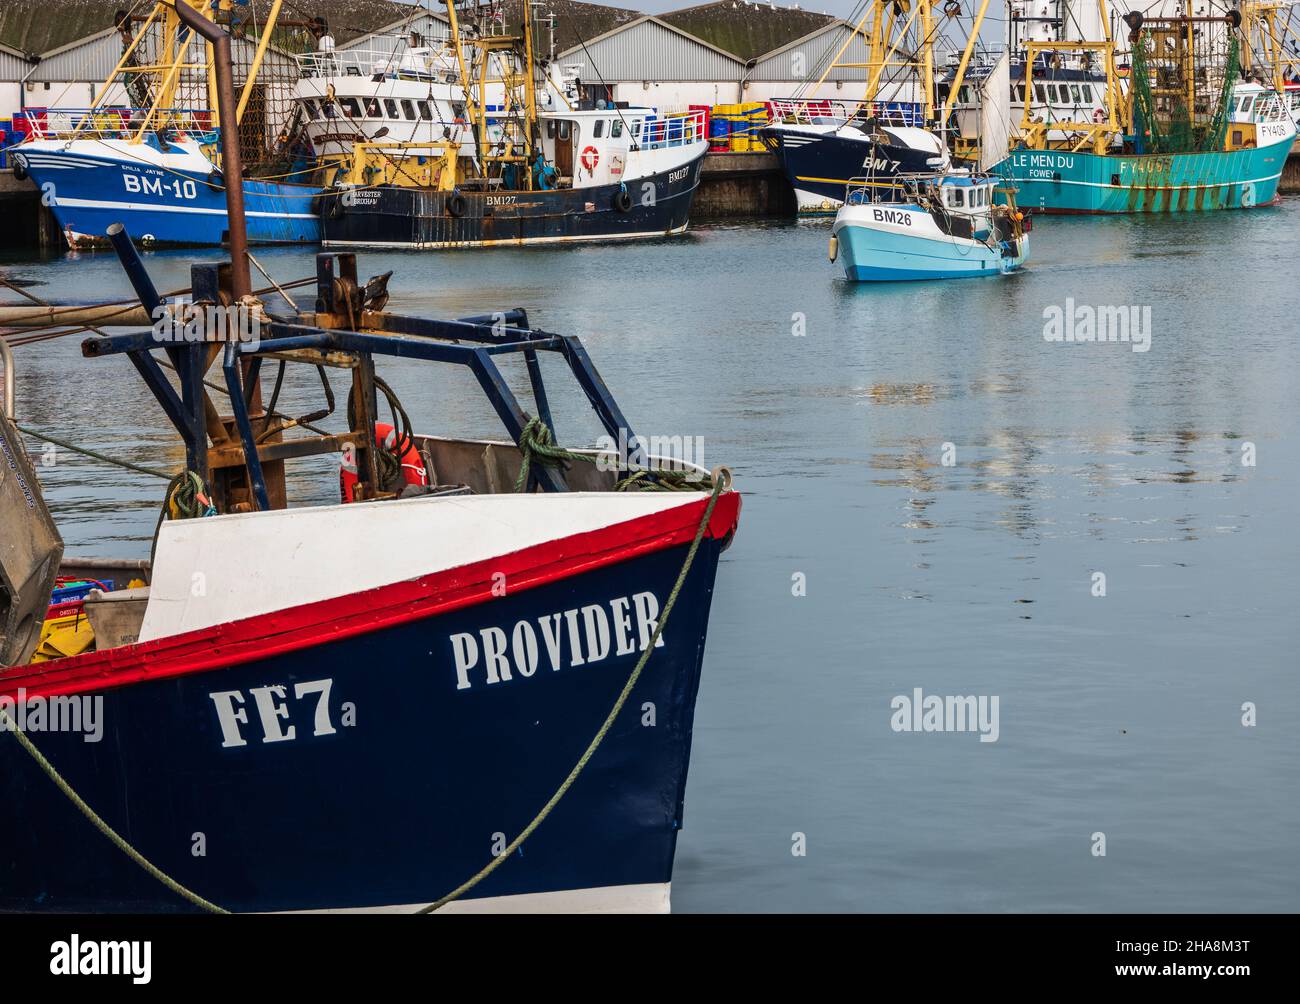 Fishing boats and trawlers in Brixham Harbour, Devon, England Stock Photo